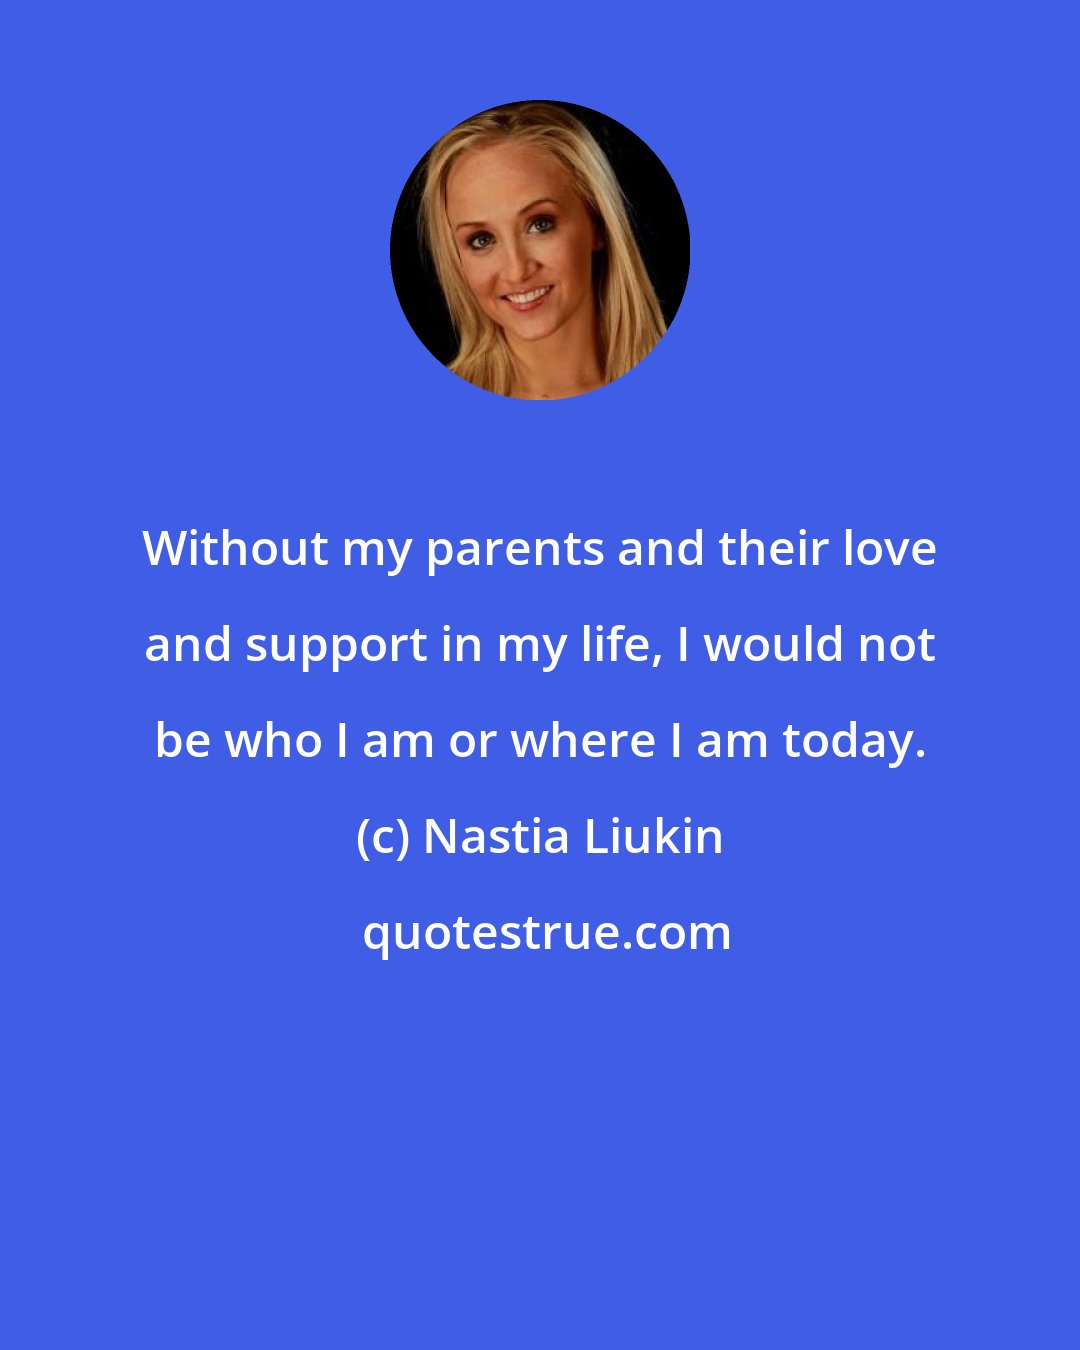 Nastia Liukin: Without my parents and their love and support in my life, I would not be who I am or where I am today.